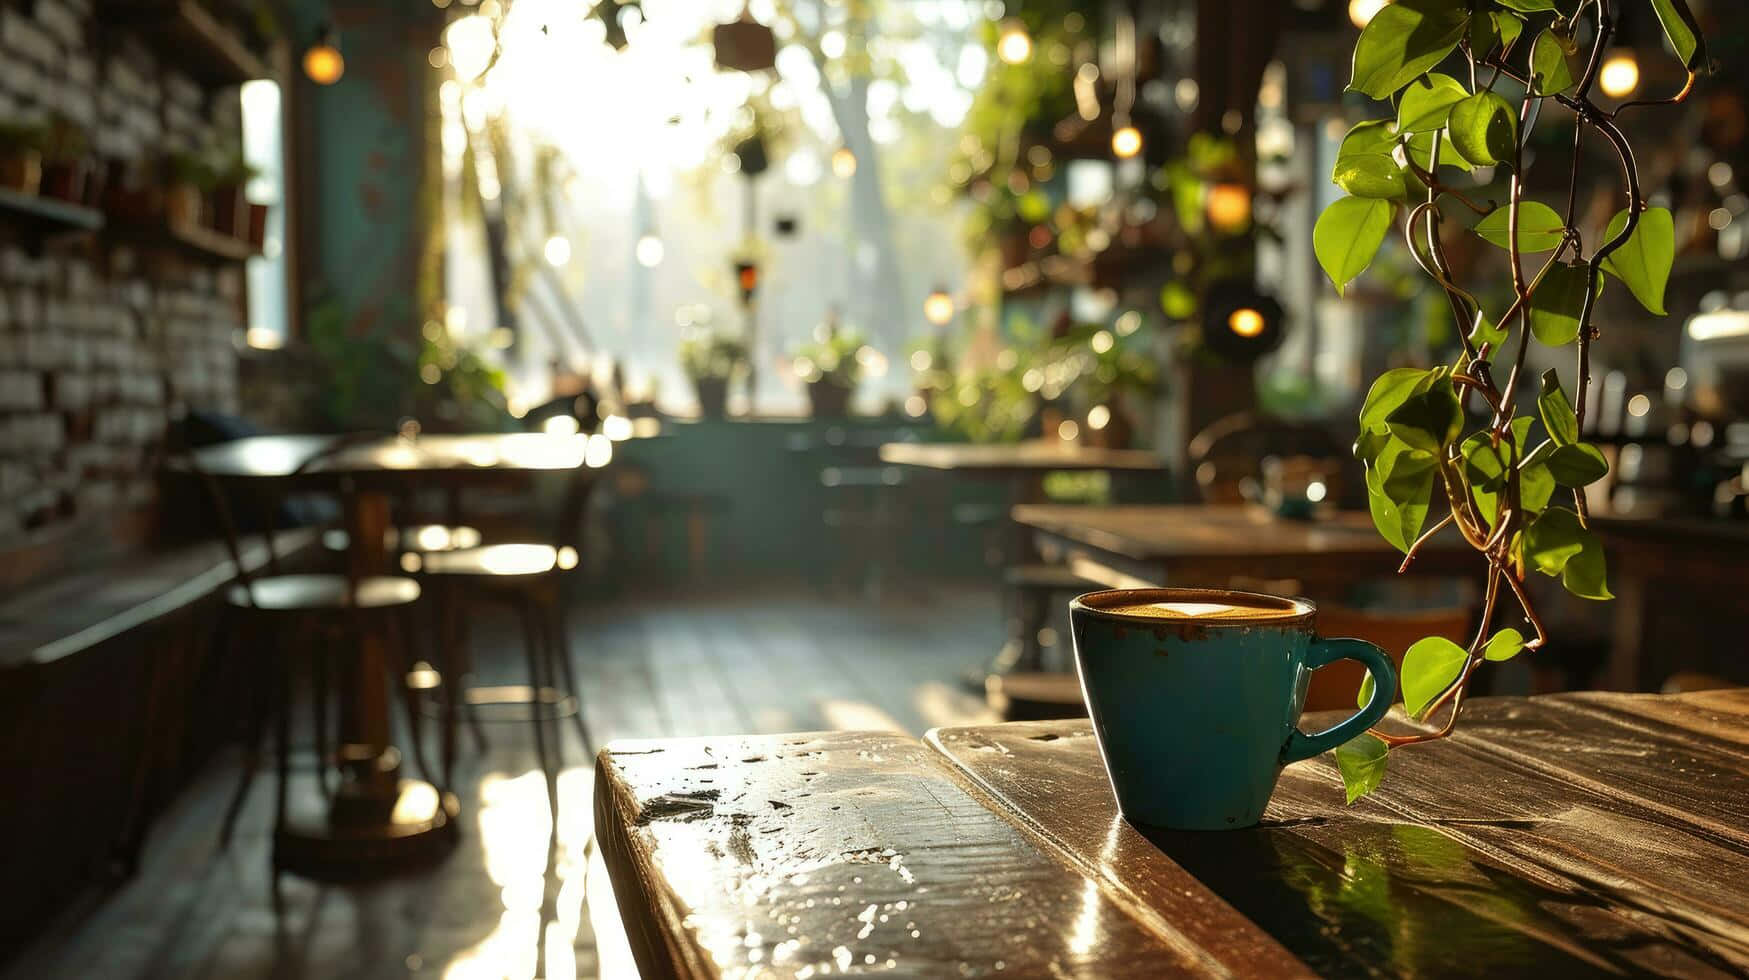 Morning Coffee Shop Ambiance Wallpaper